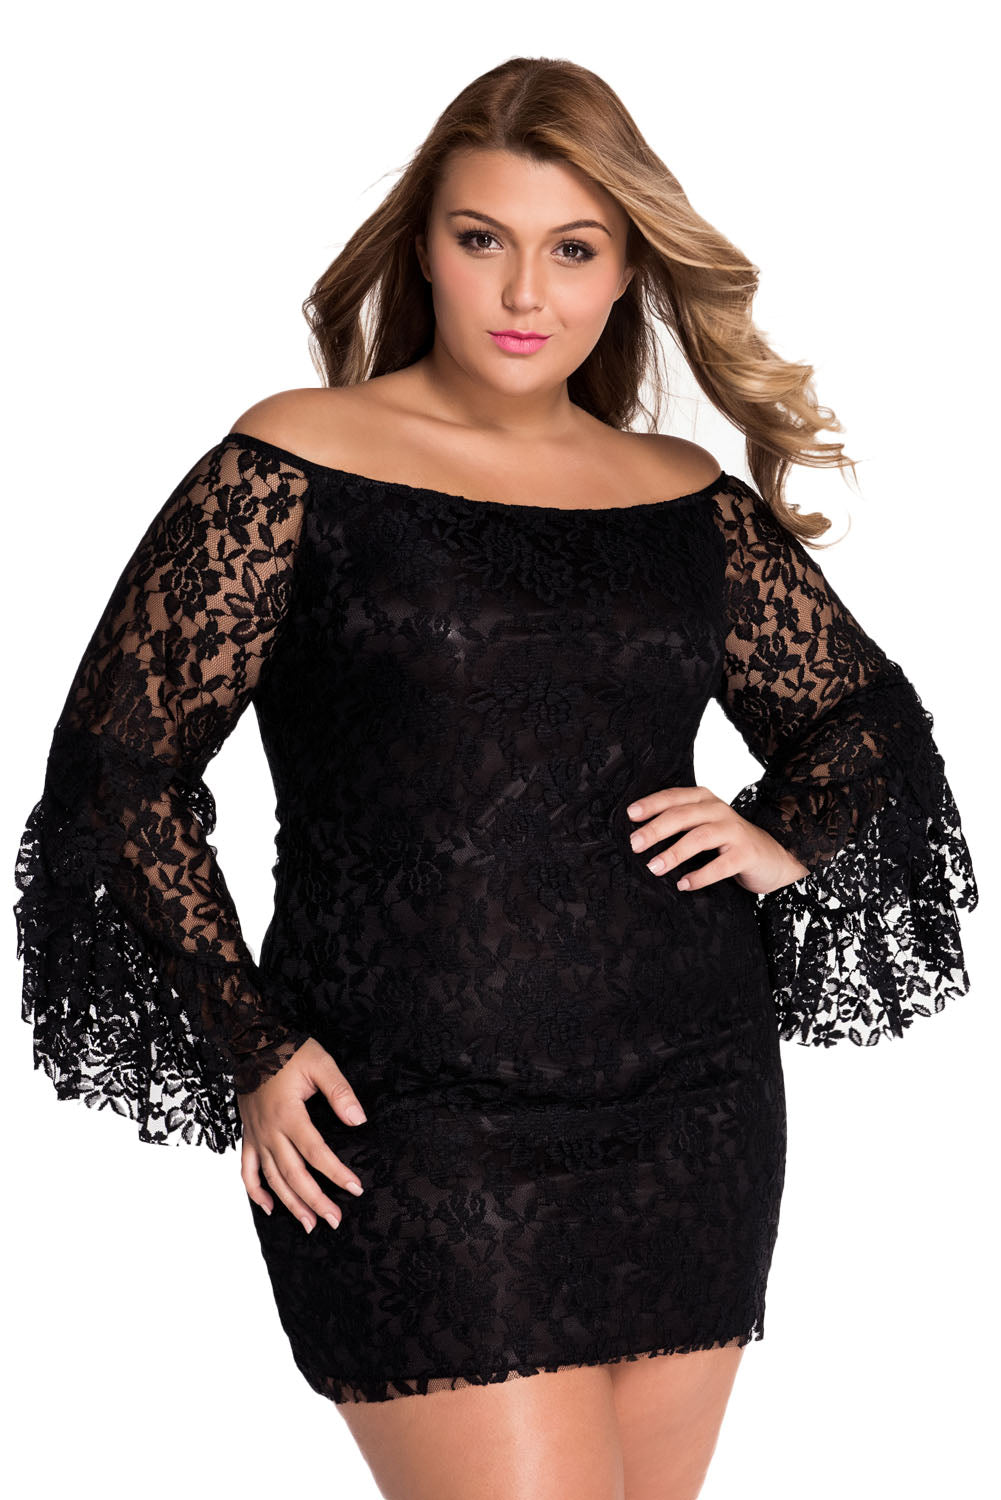 Sexy Plus Size Black Lace Off The Shoulder Mini Dress Sexy Affordable Clothing